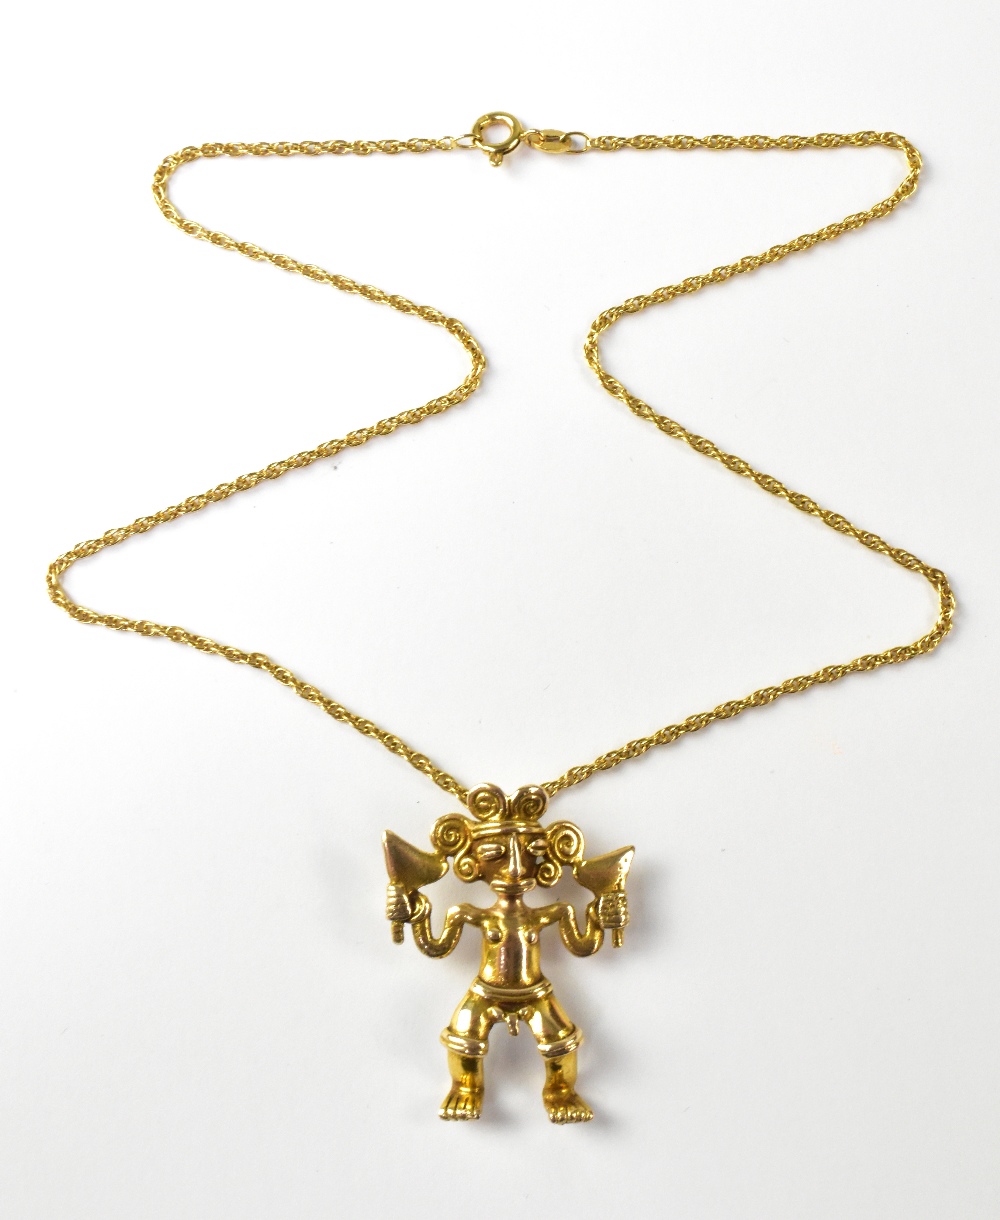 A 9ct yellow gold Aztec pendant on a 9ct yellow gold link chain, combined approx 10g.